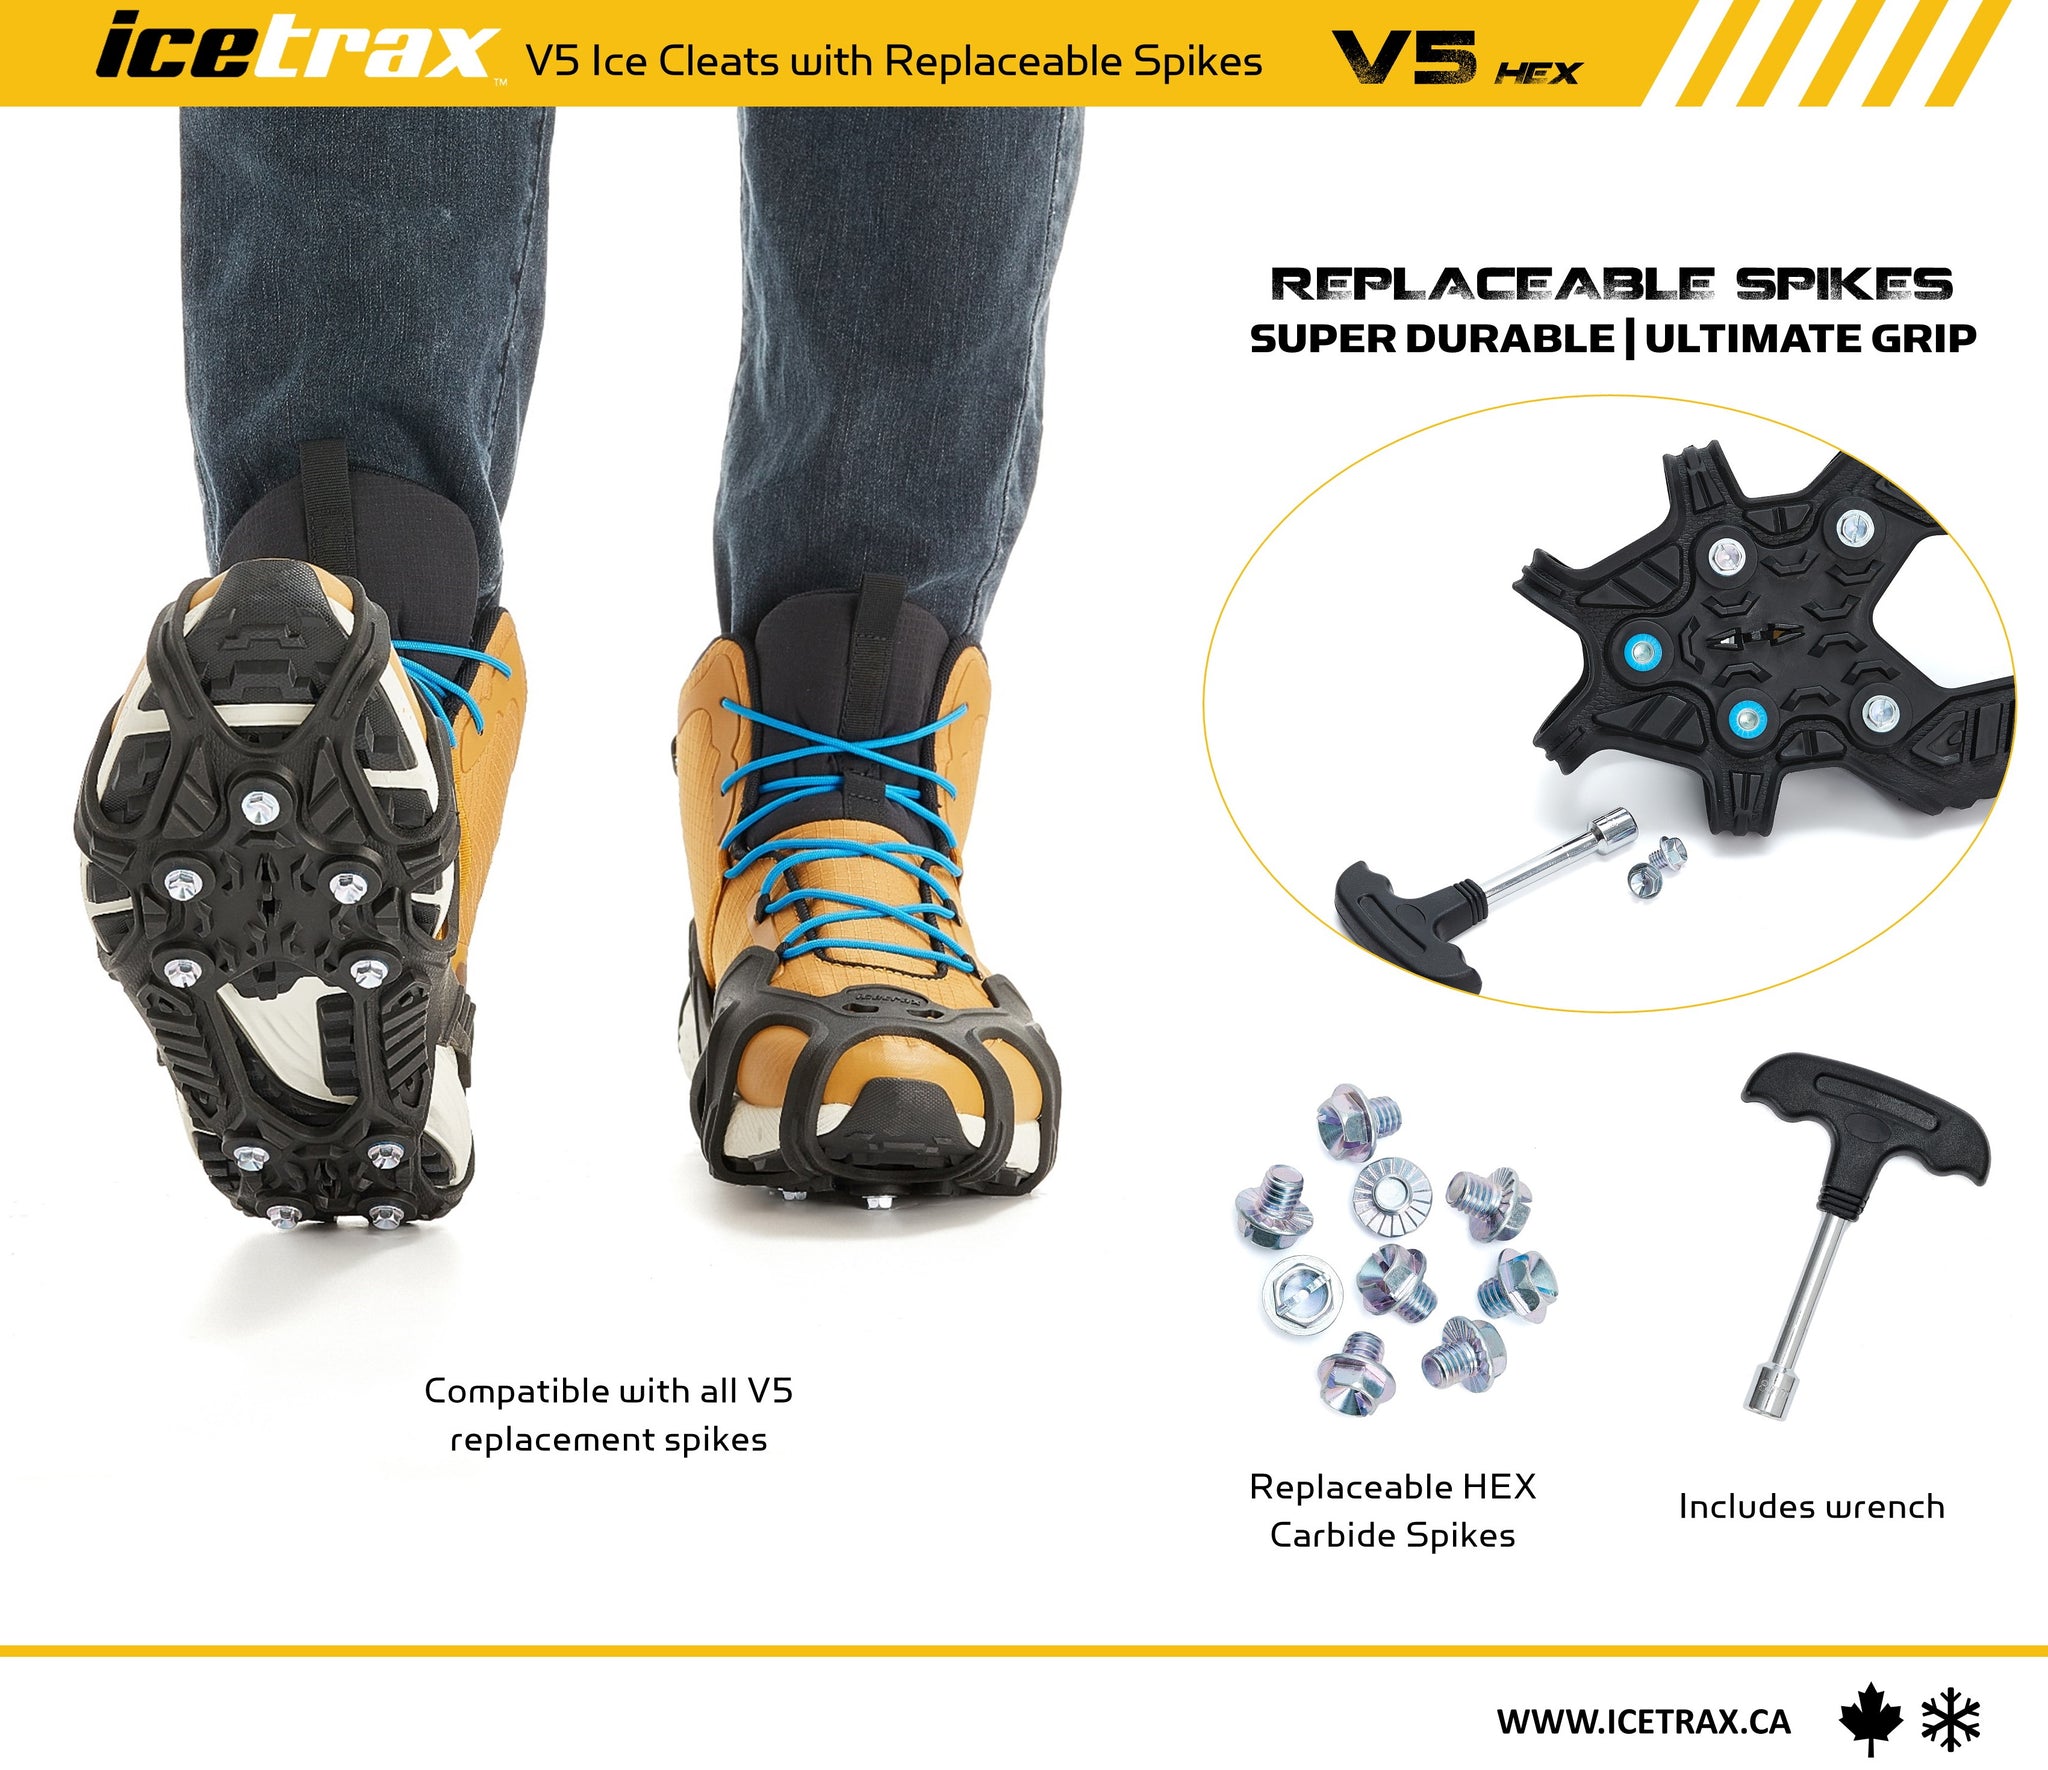 ICETRAX Pro HEX Grip Winter Ice Cleats for Shoes and Boots - Ice